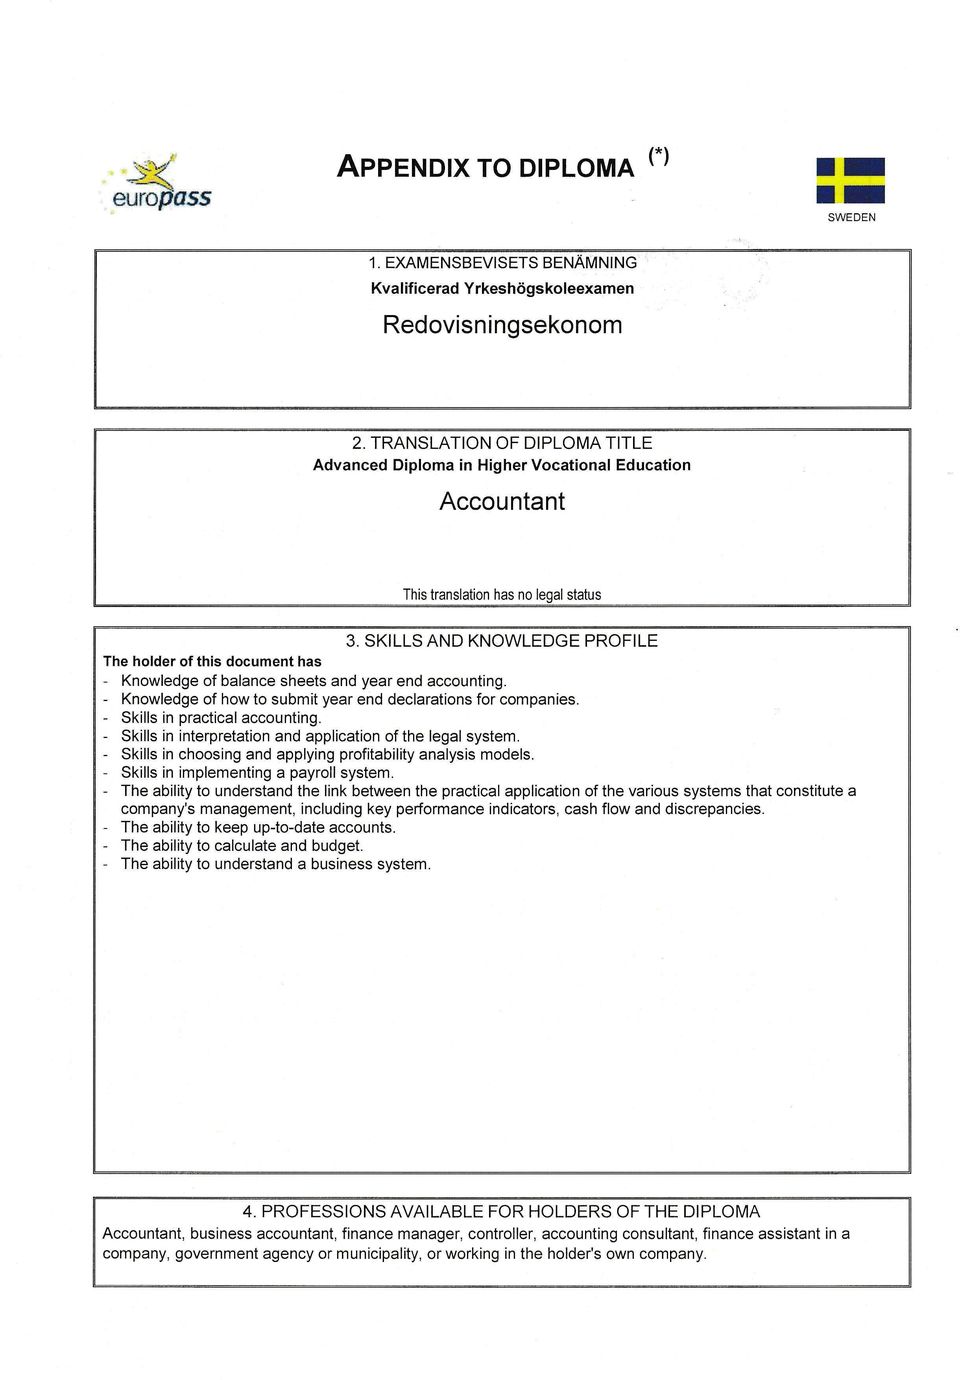 SKILLS AND KNOWLEDGE PROFILE The holder of this document has - Knowledge of balance sheets and year end accounting. - Knowledge of how to submit year end declarations for companies.